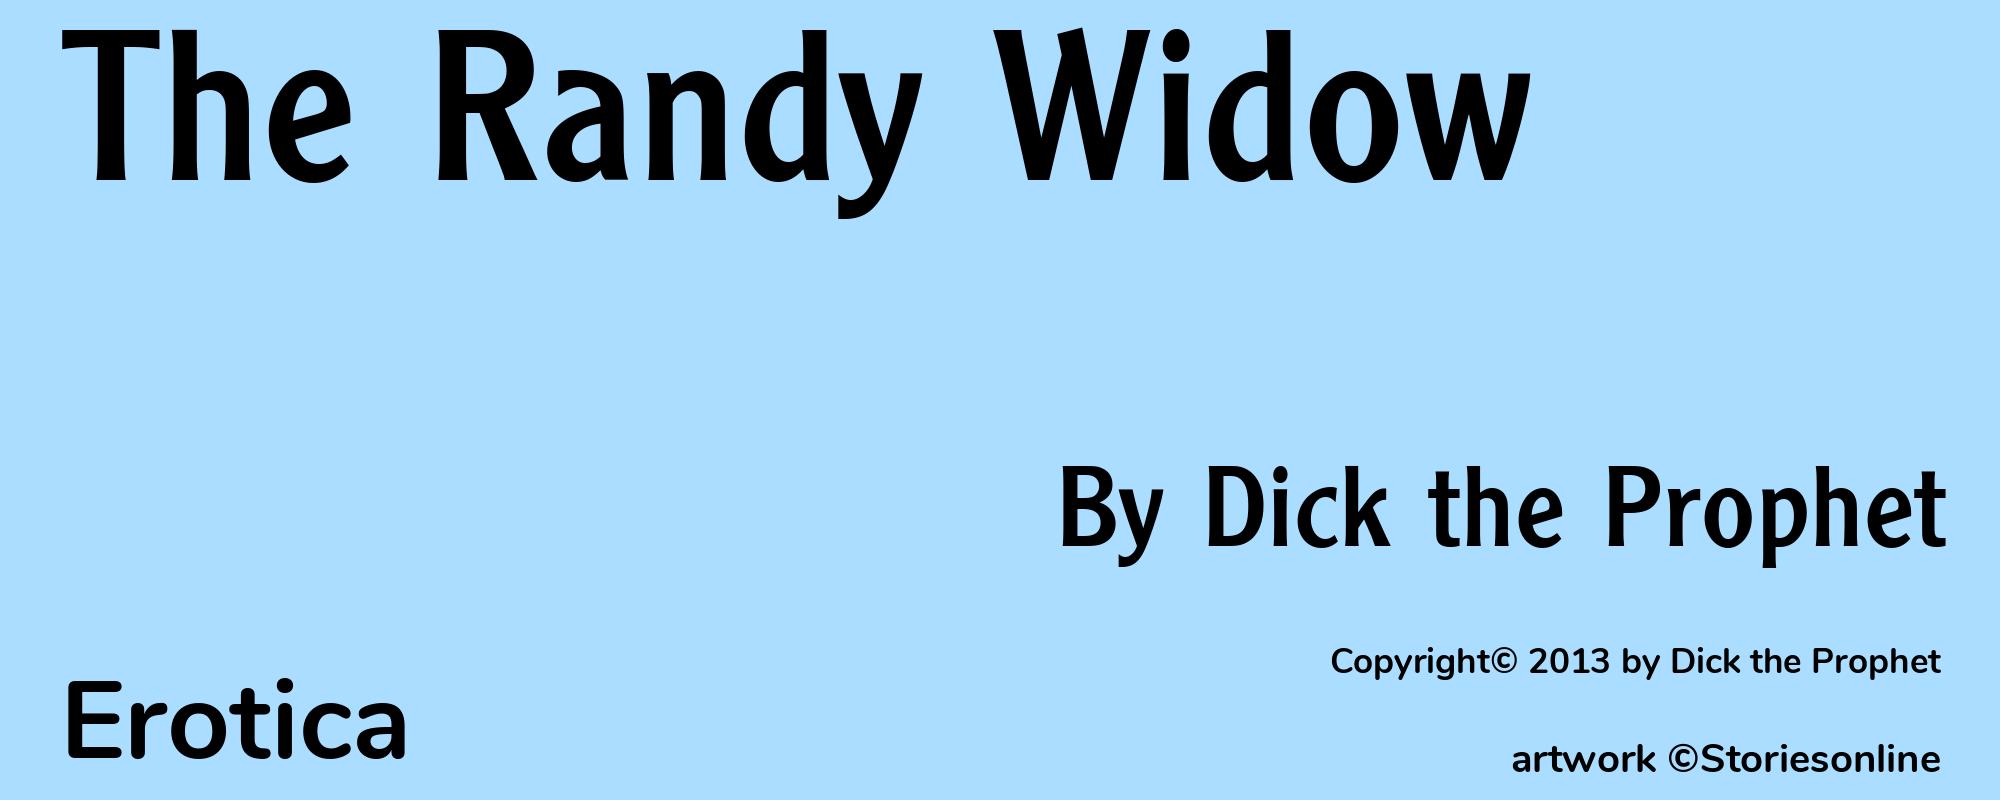 The Randy Widow - Cover